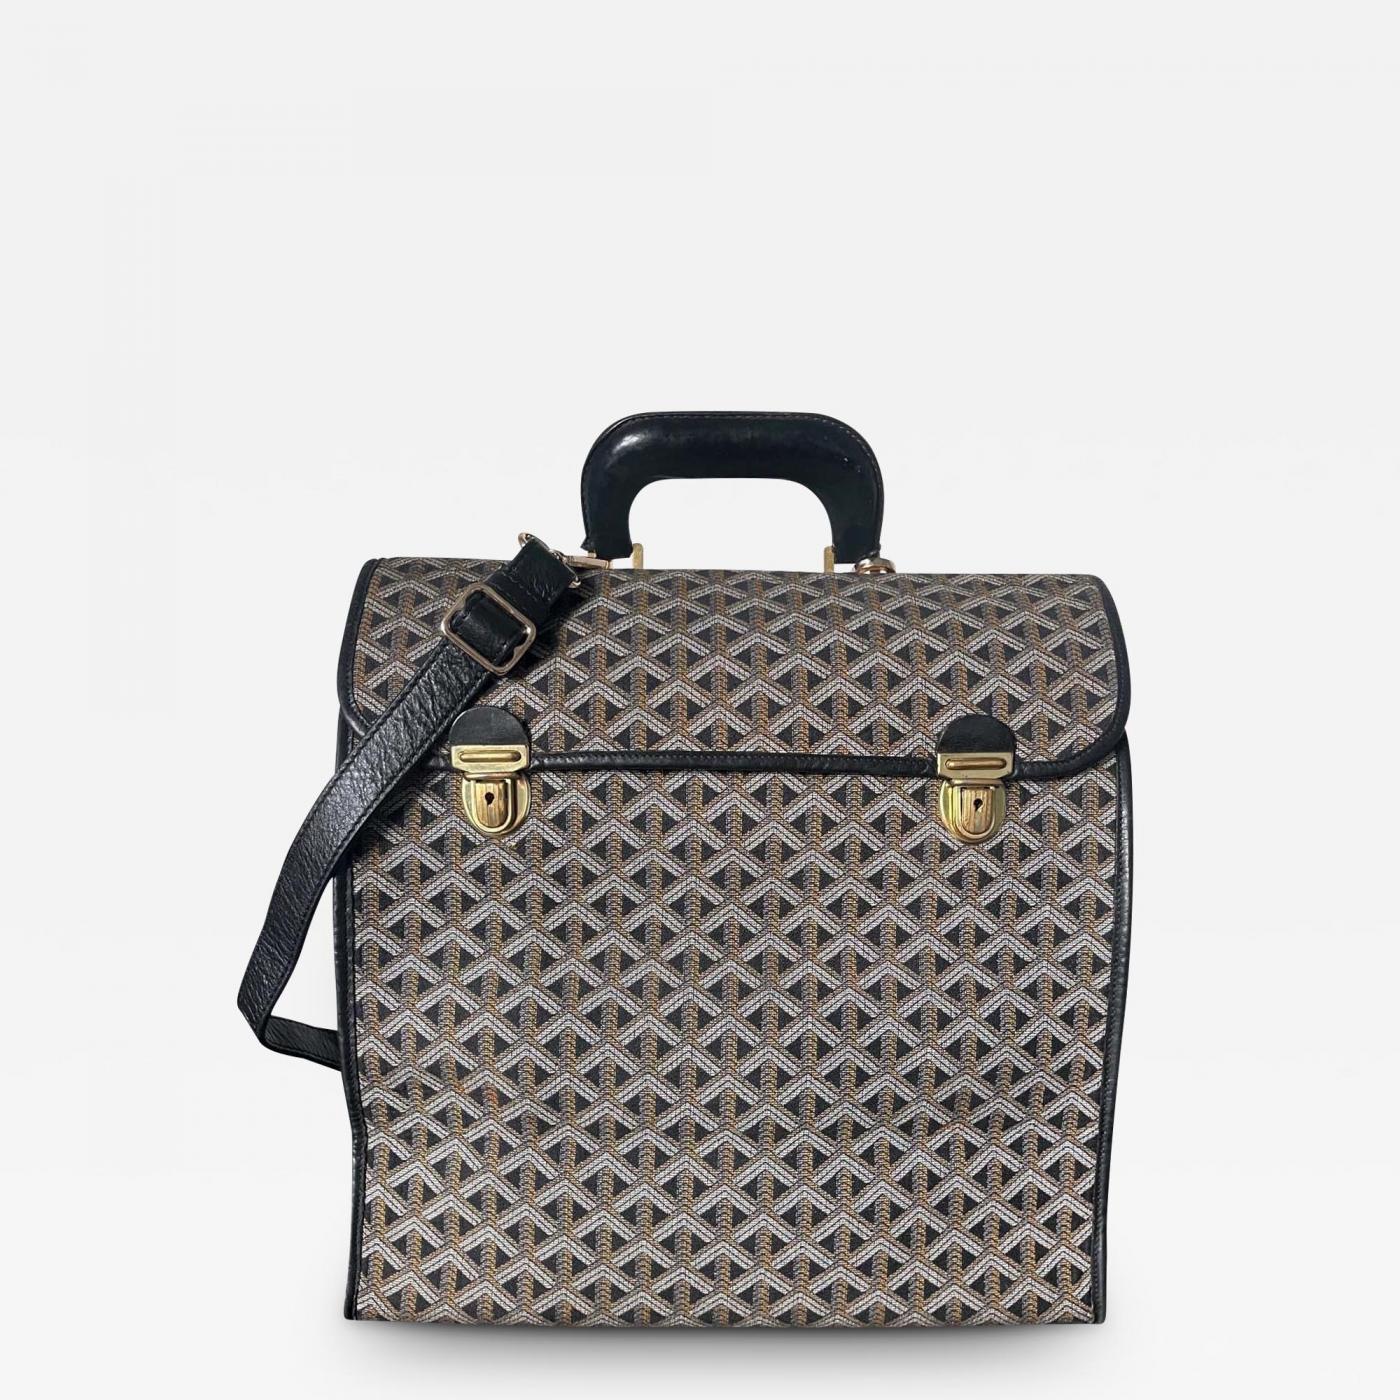 Goyard Steamer Bag in Canvas and Leather